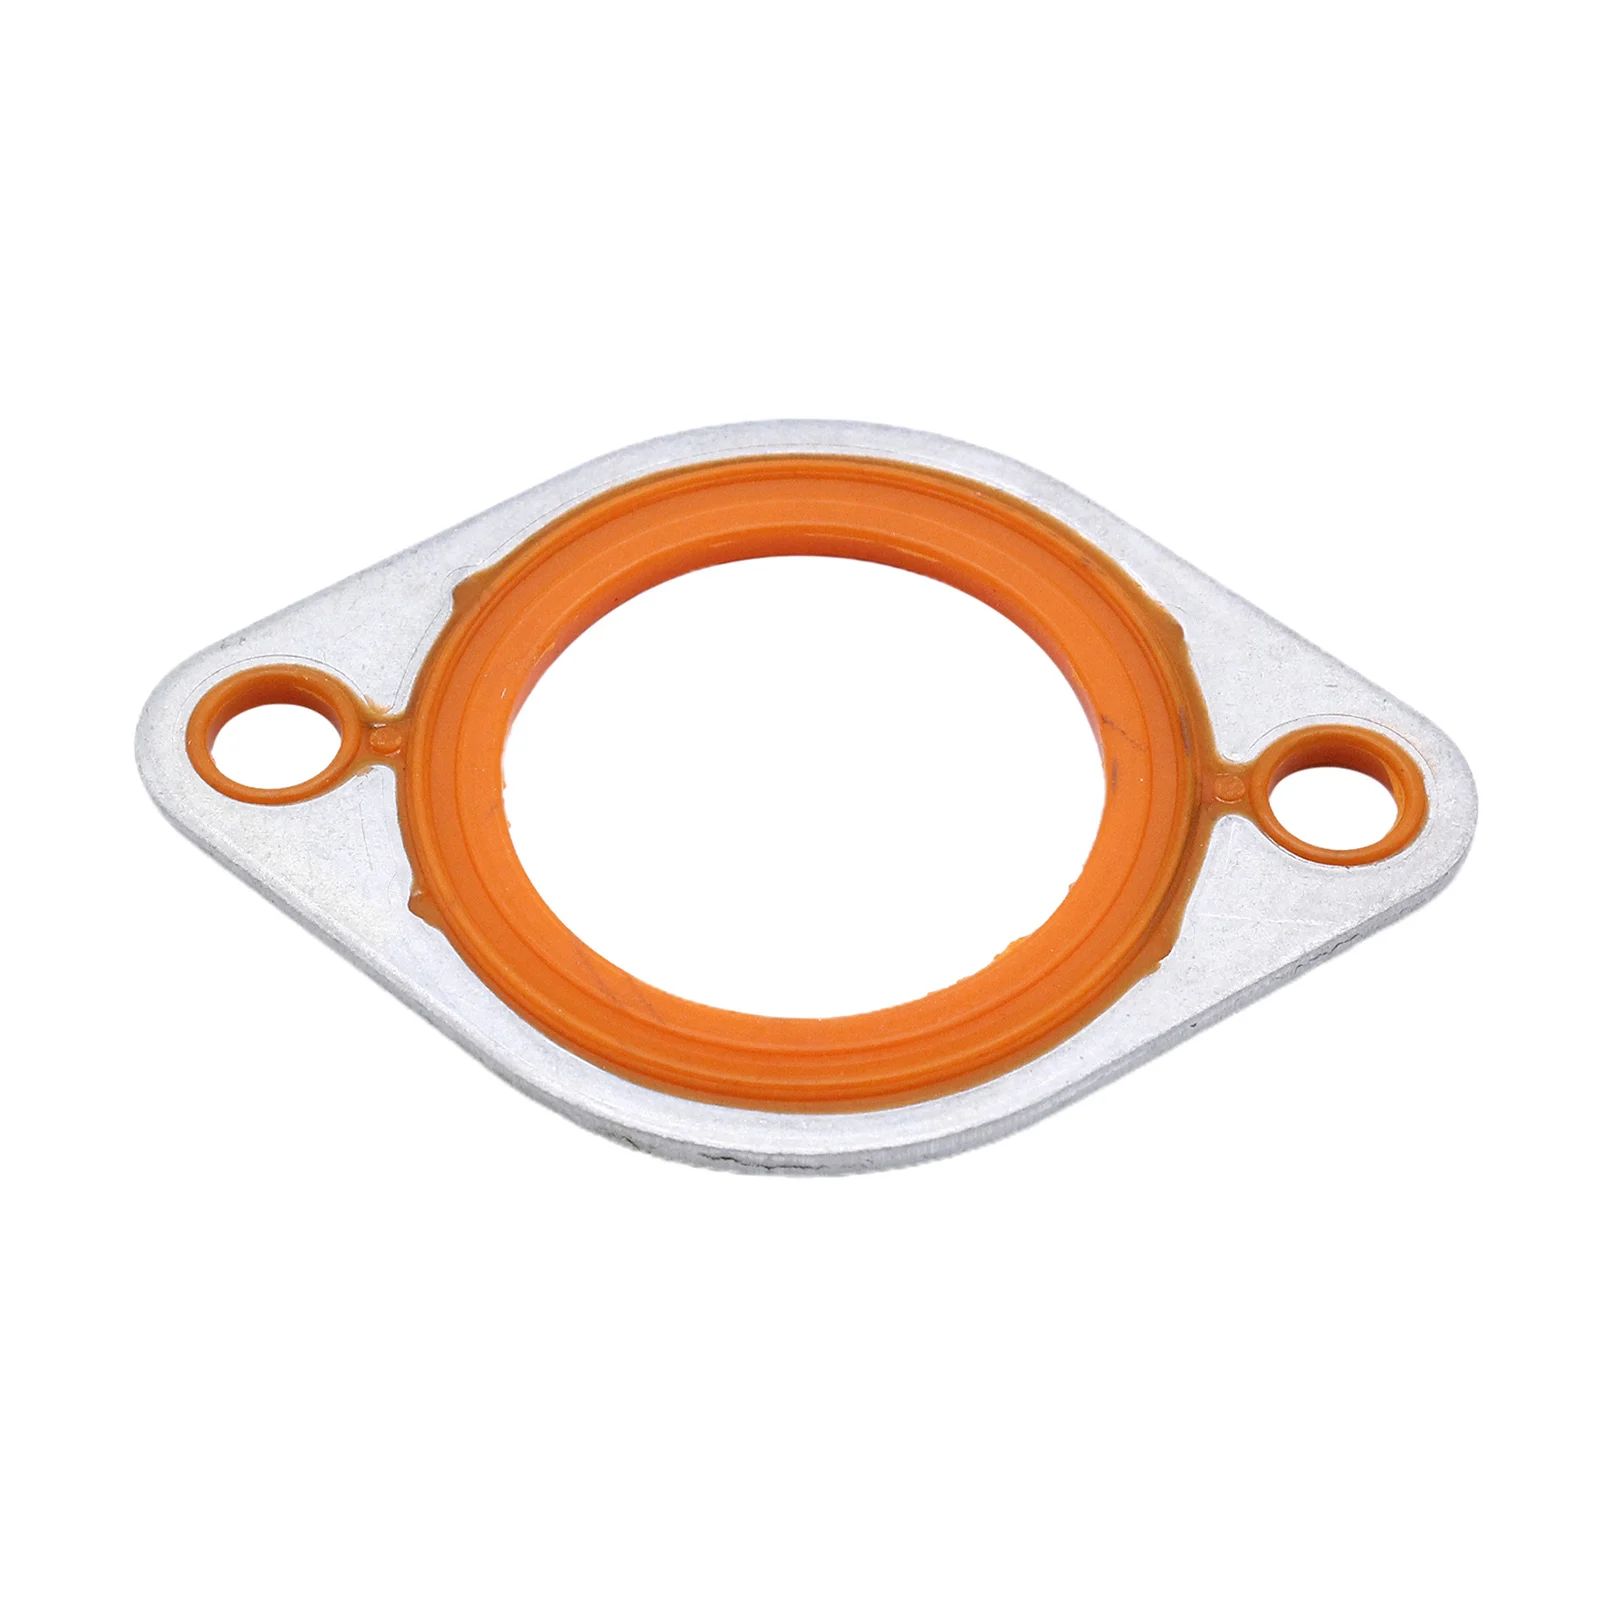 Thermostat Water Neck Housing Gasket for Chevy SBC BBC 283 327 350 383 400 454 502 Aluminum/Silicone Replacement Parts